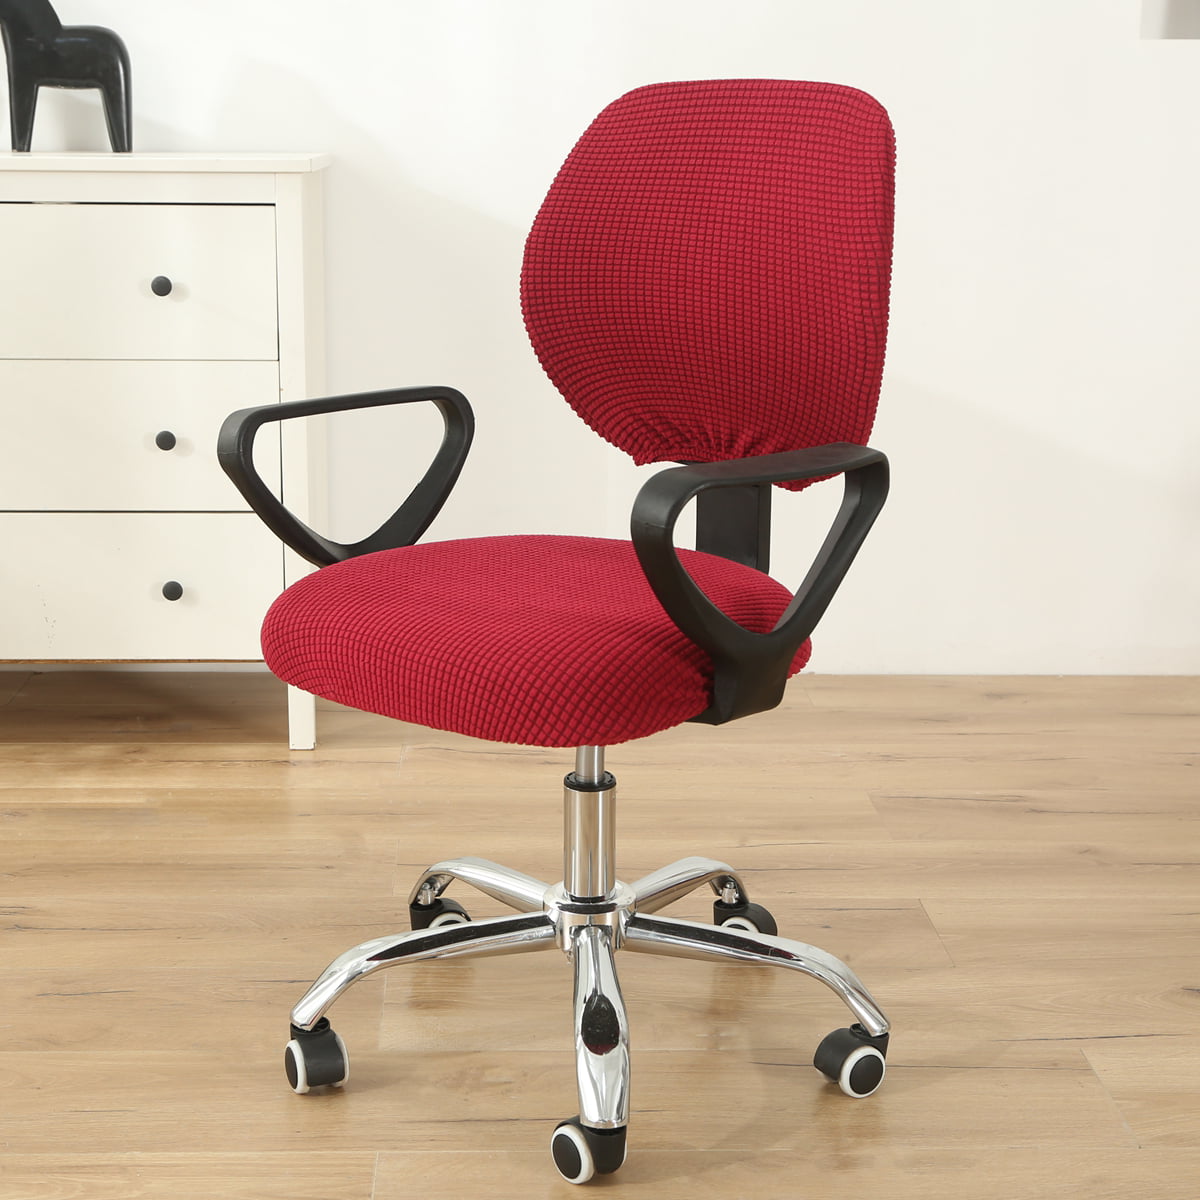 Study Office Armchair Computer Swivel Rotating Desk Chair Cover Protector Decor